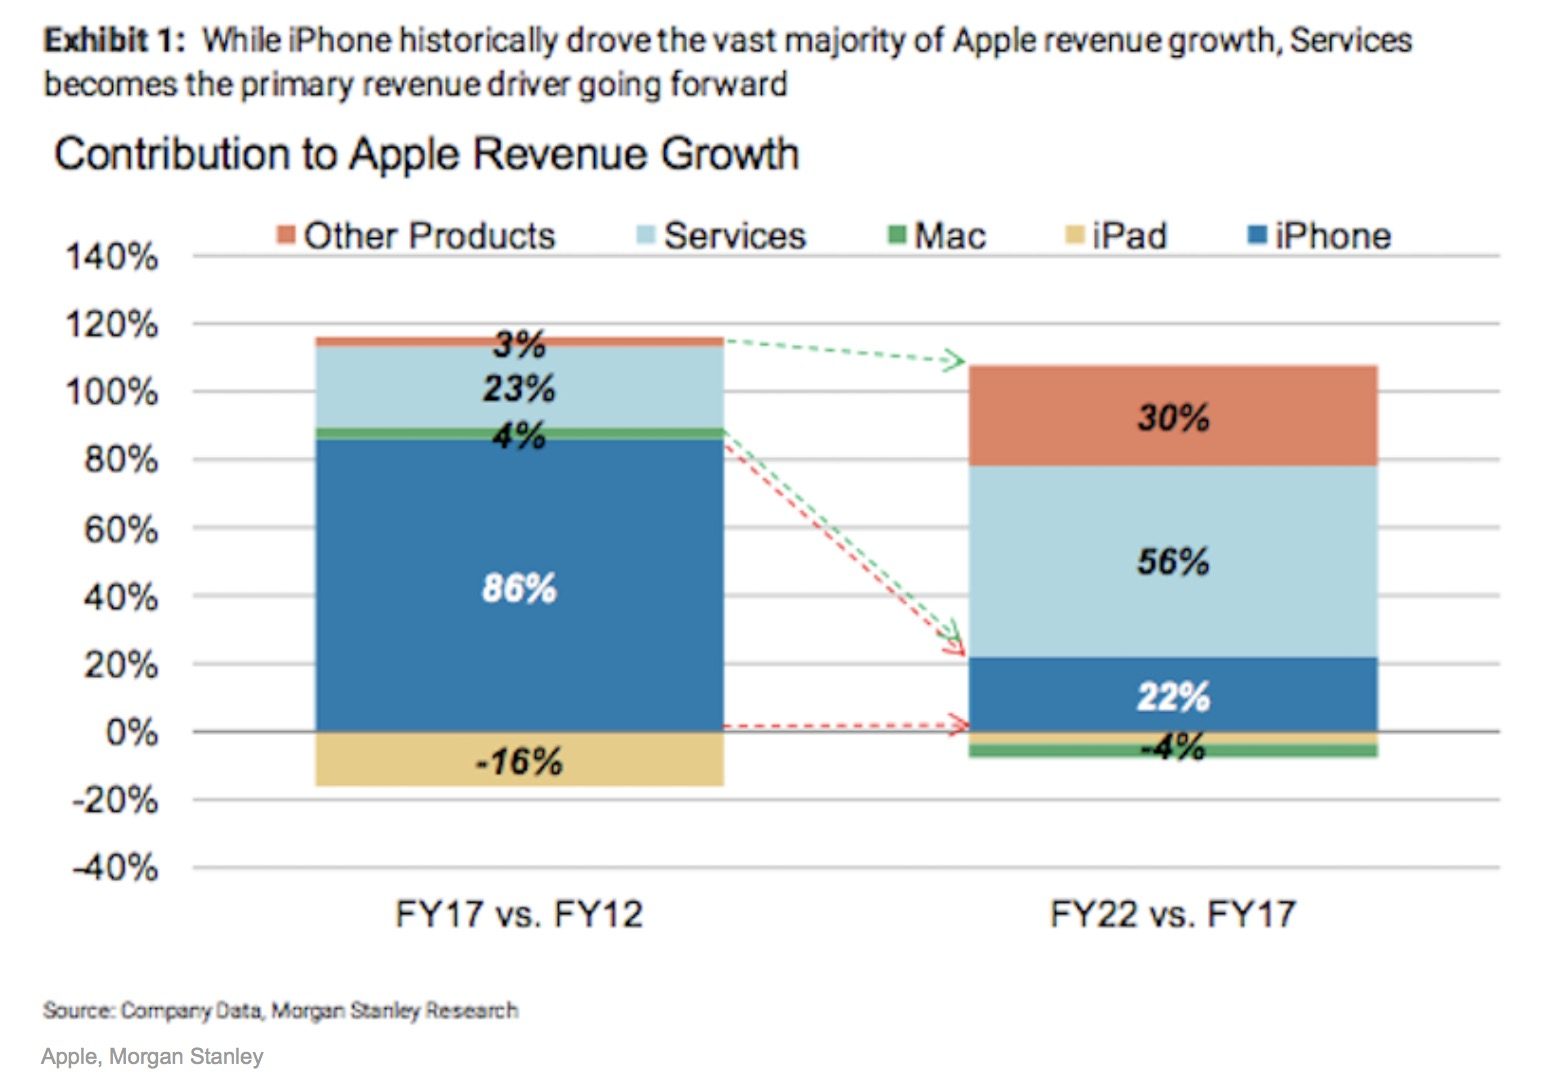 Apple Watch and Services Will Overtake iPhone as main Growth Driver 